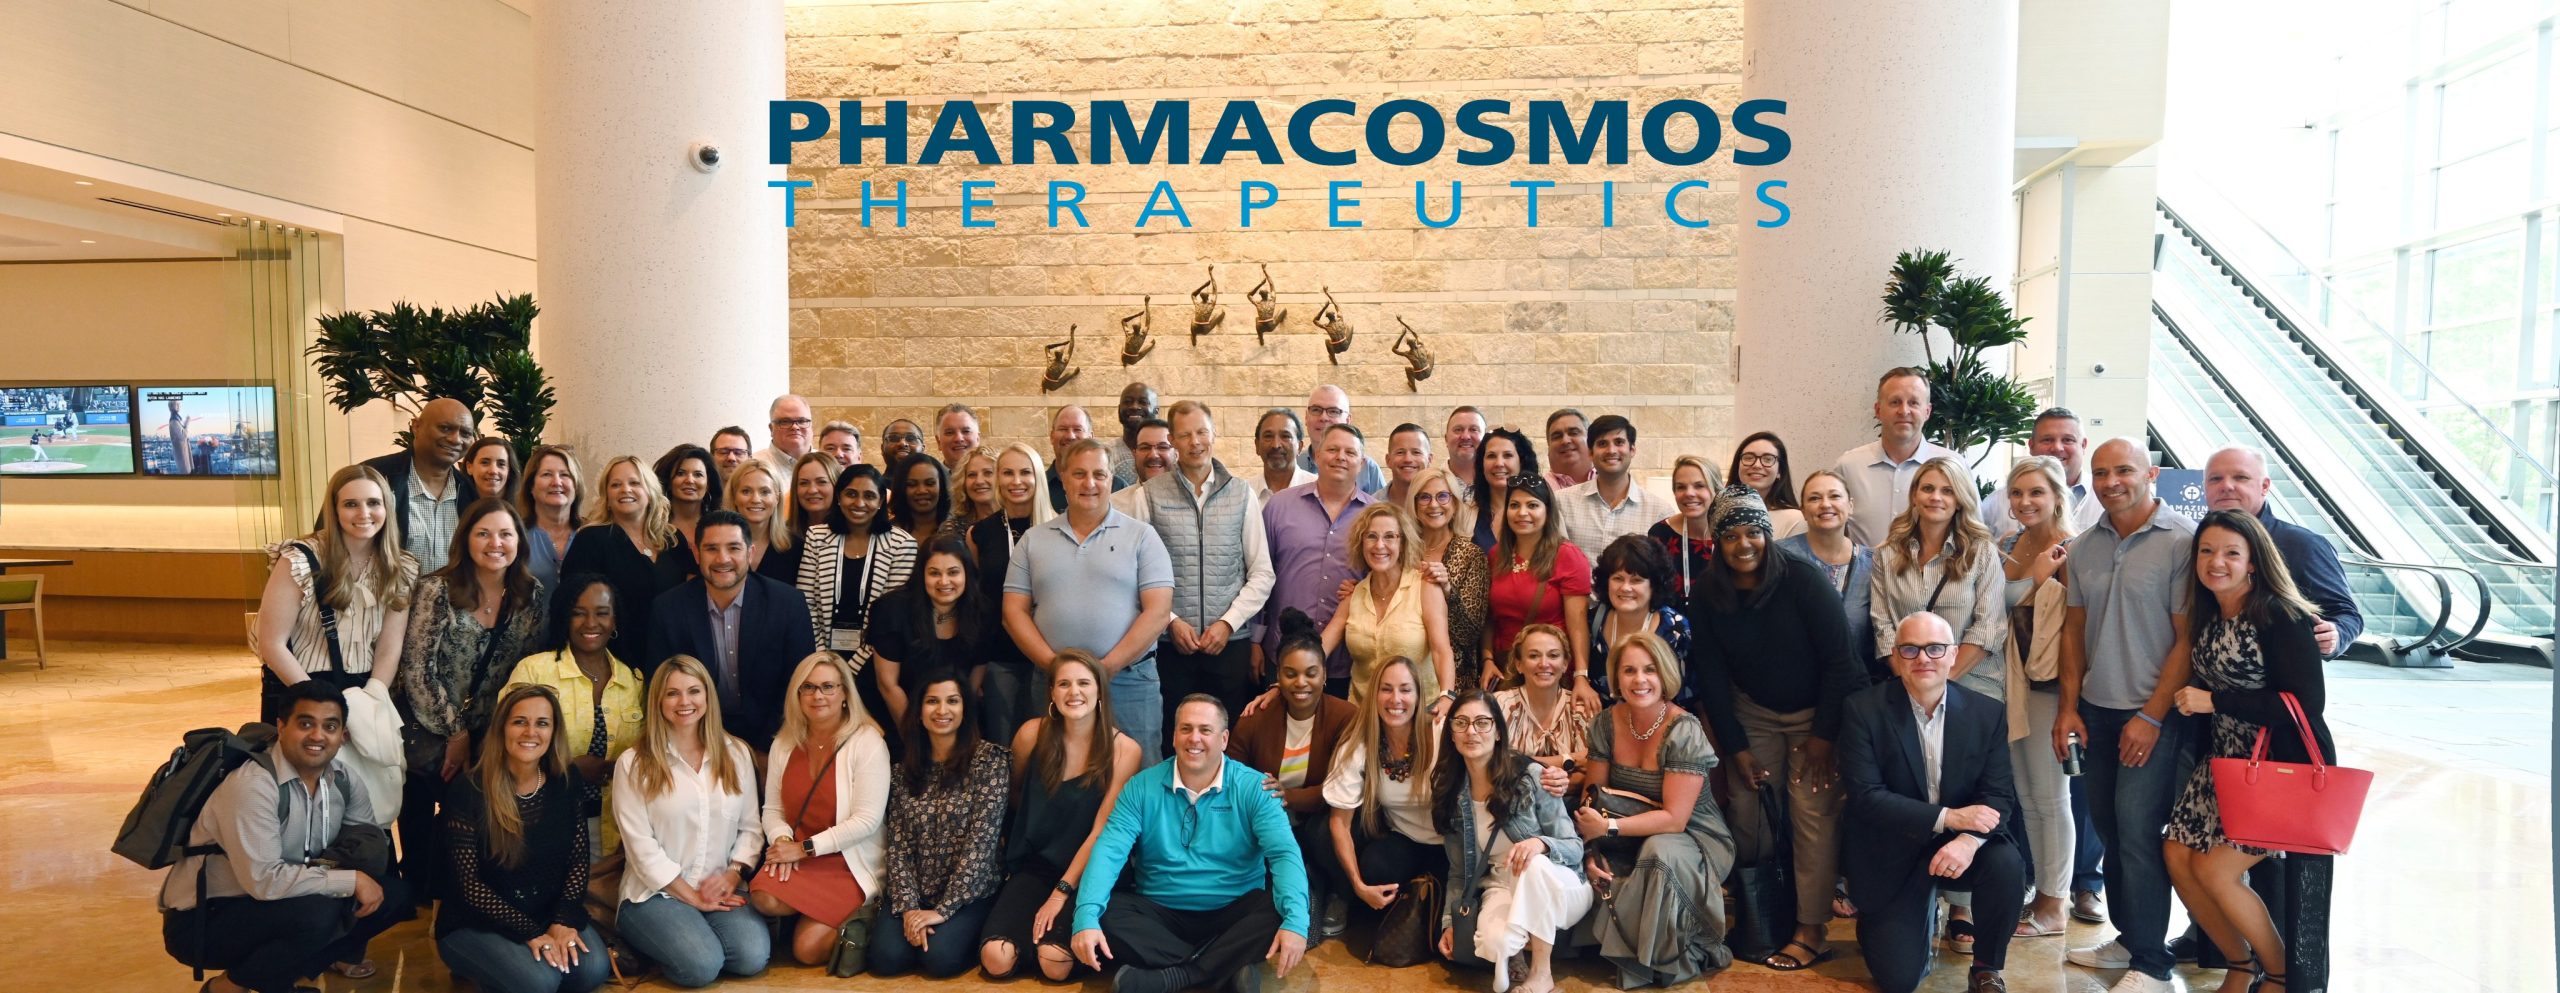 Pharmacosmos Therapeutics Combines Passion and Purpose to Pack Food for Children and Families